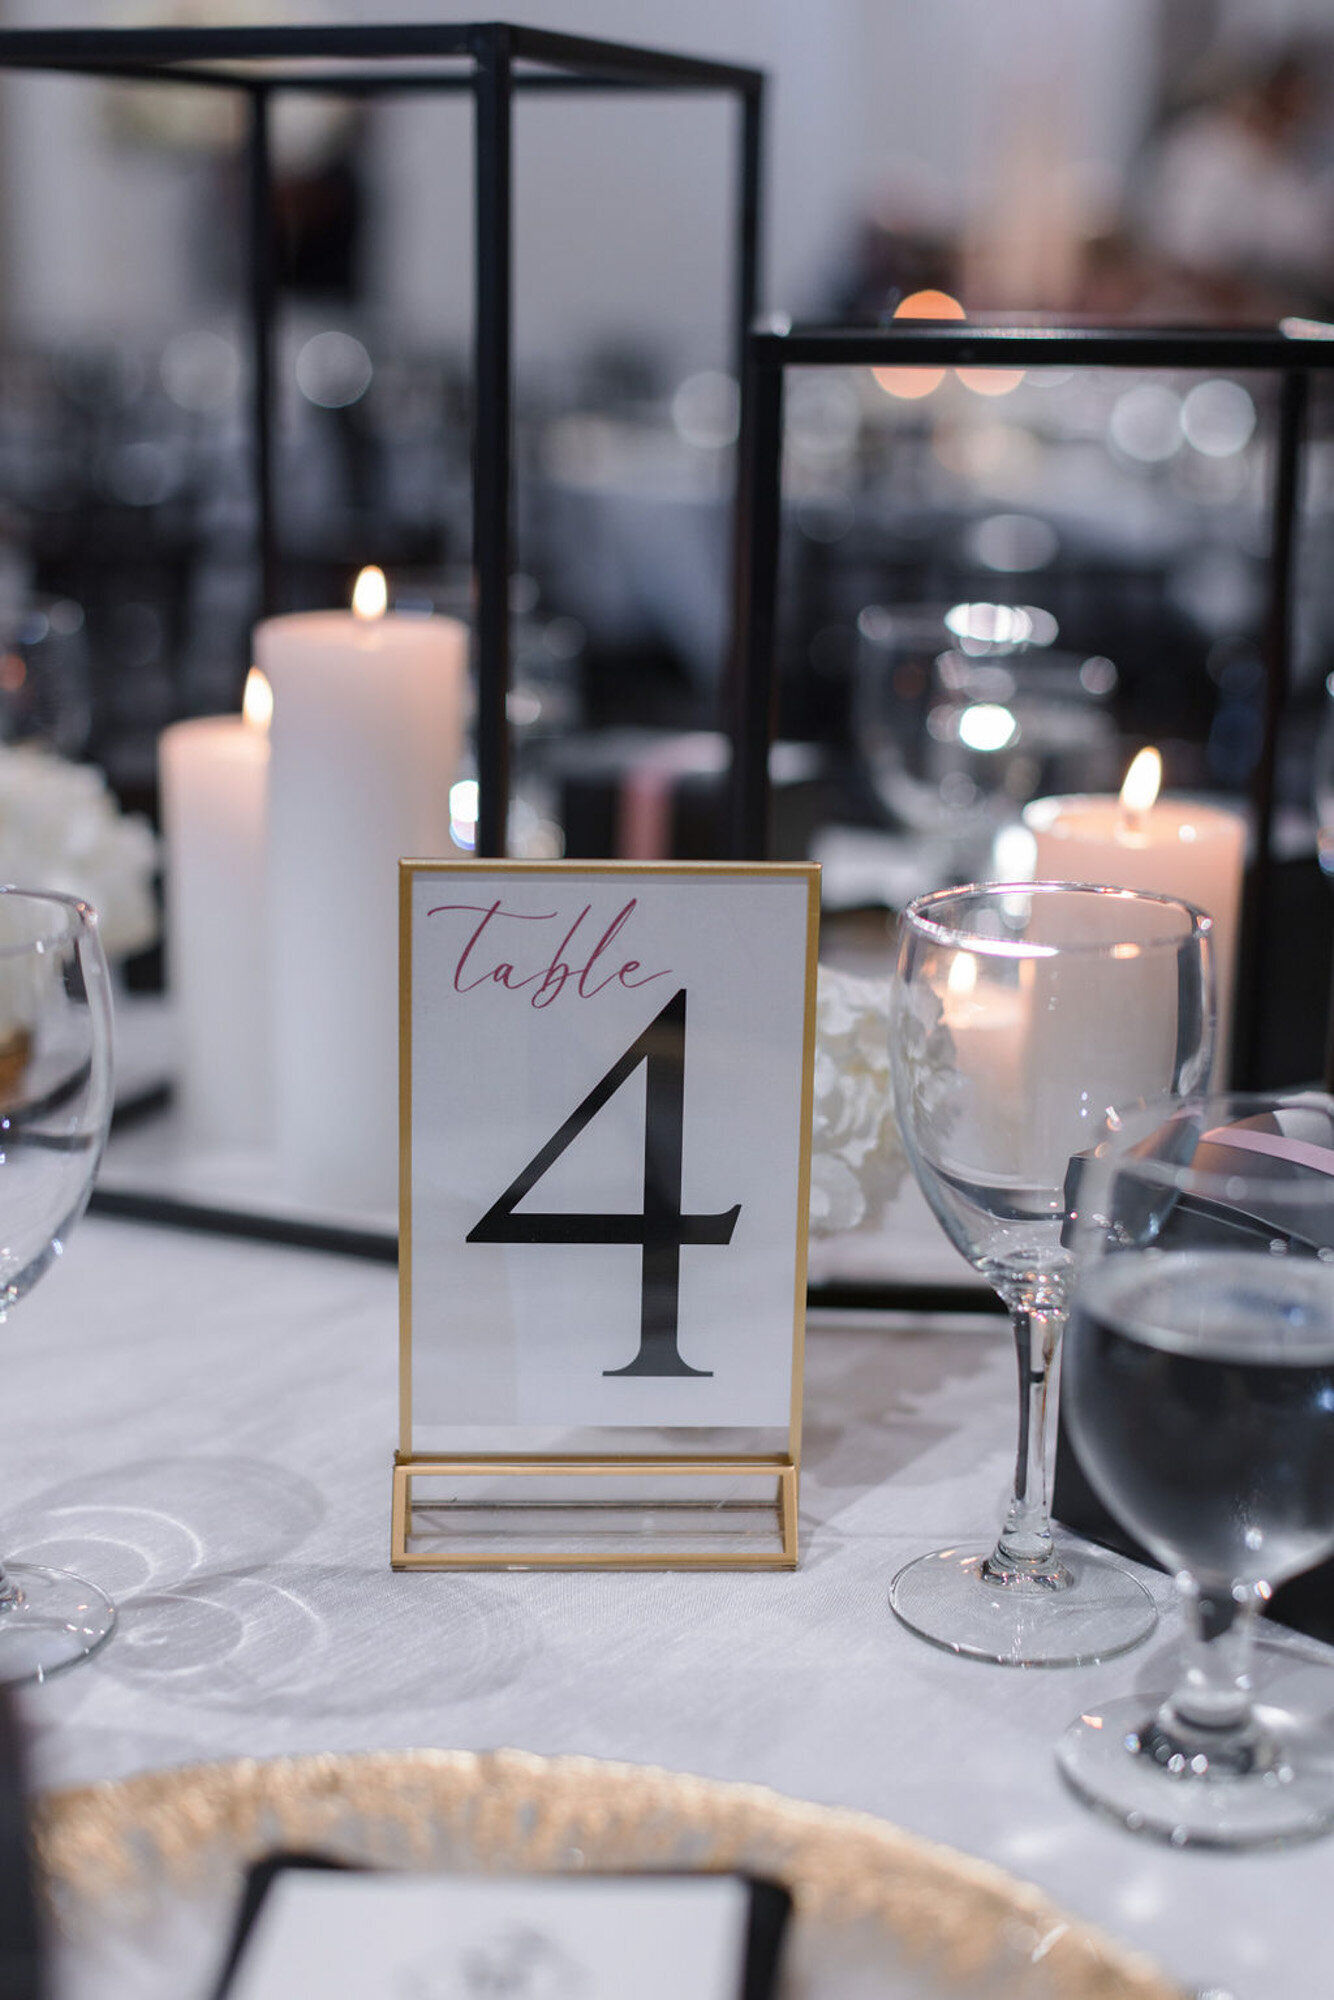 table four centerpiece with glasses and other luxury details